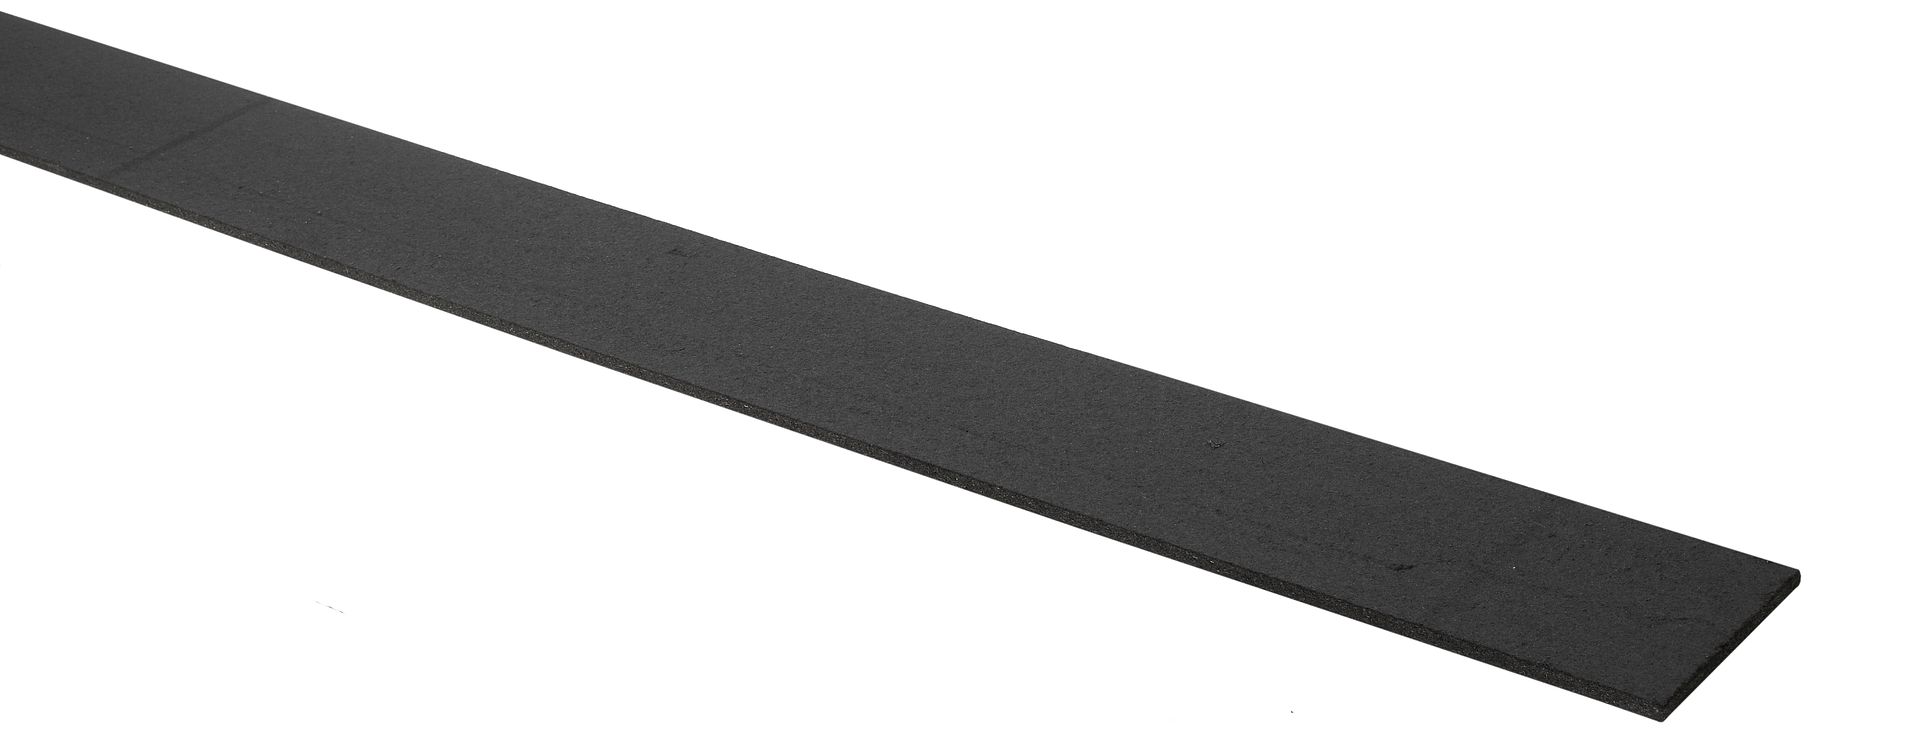 4" X 10' EXPANSION JOINT